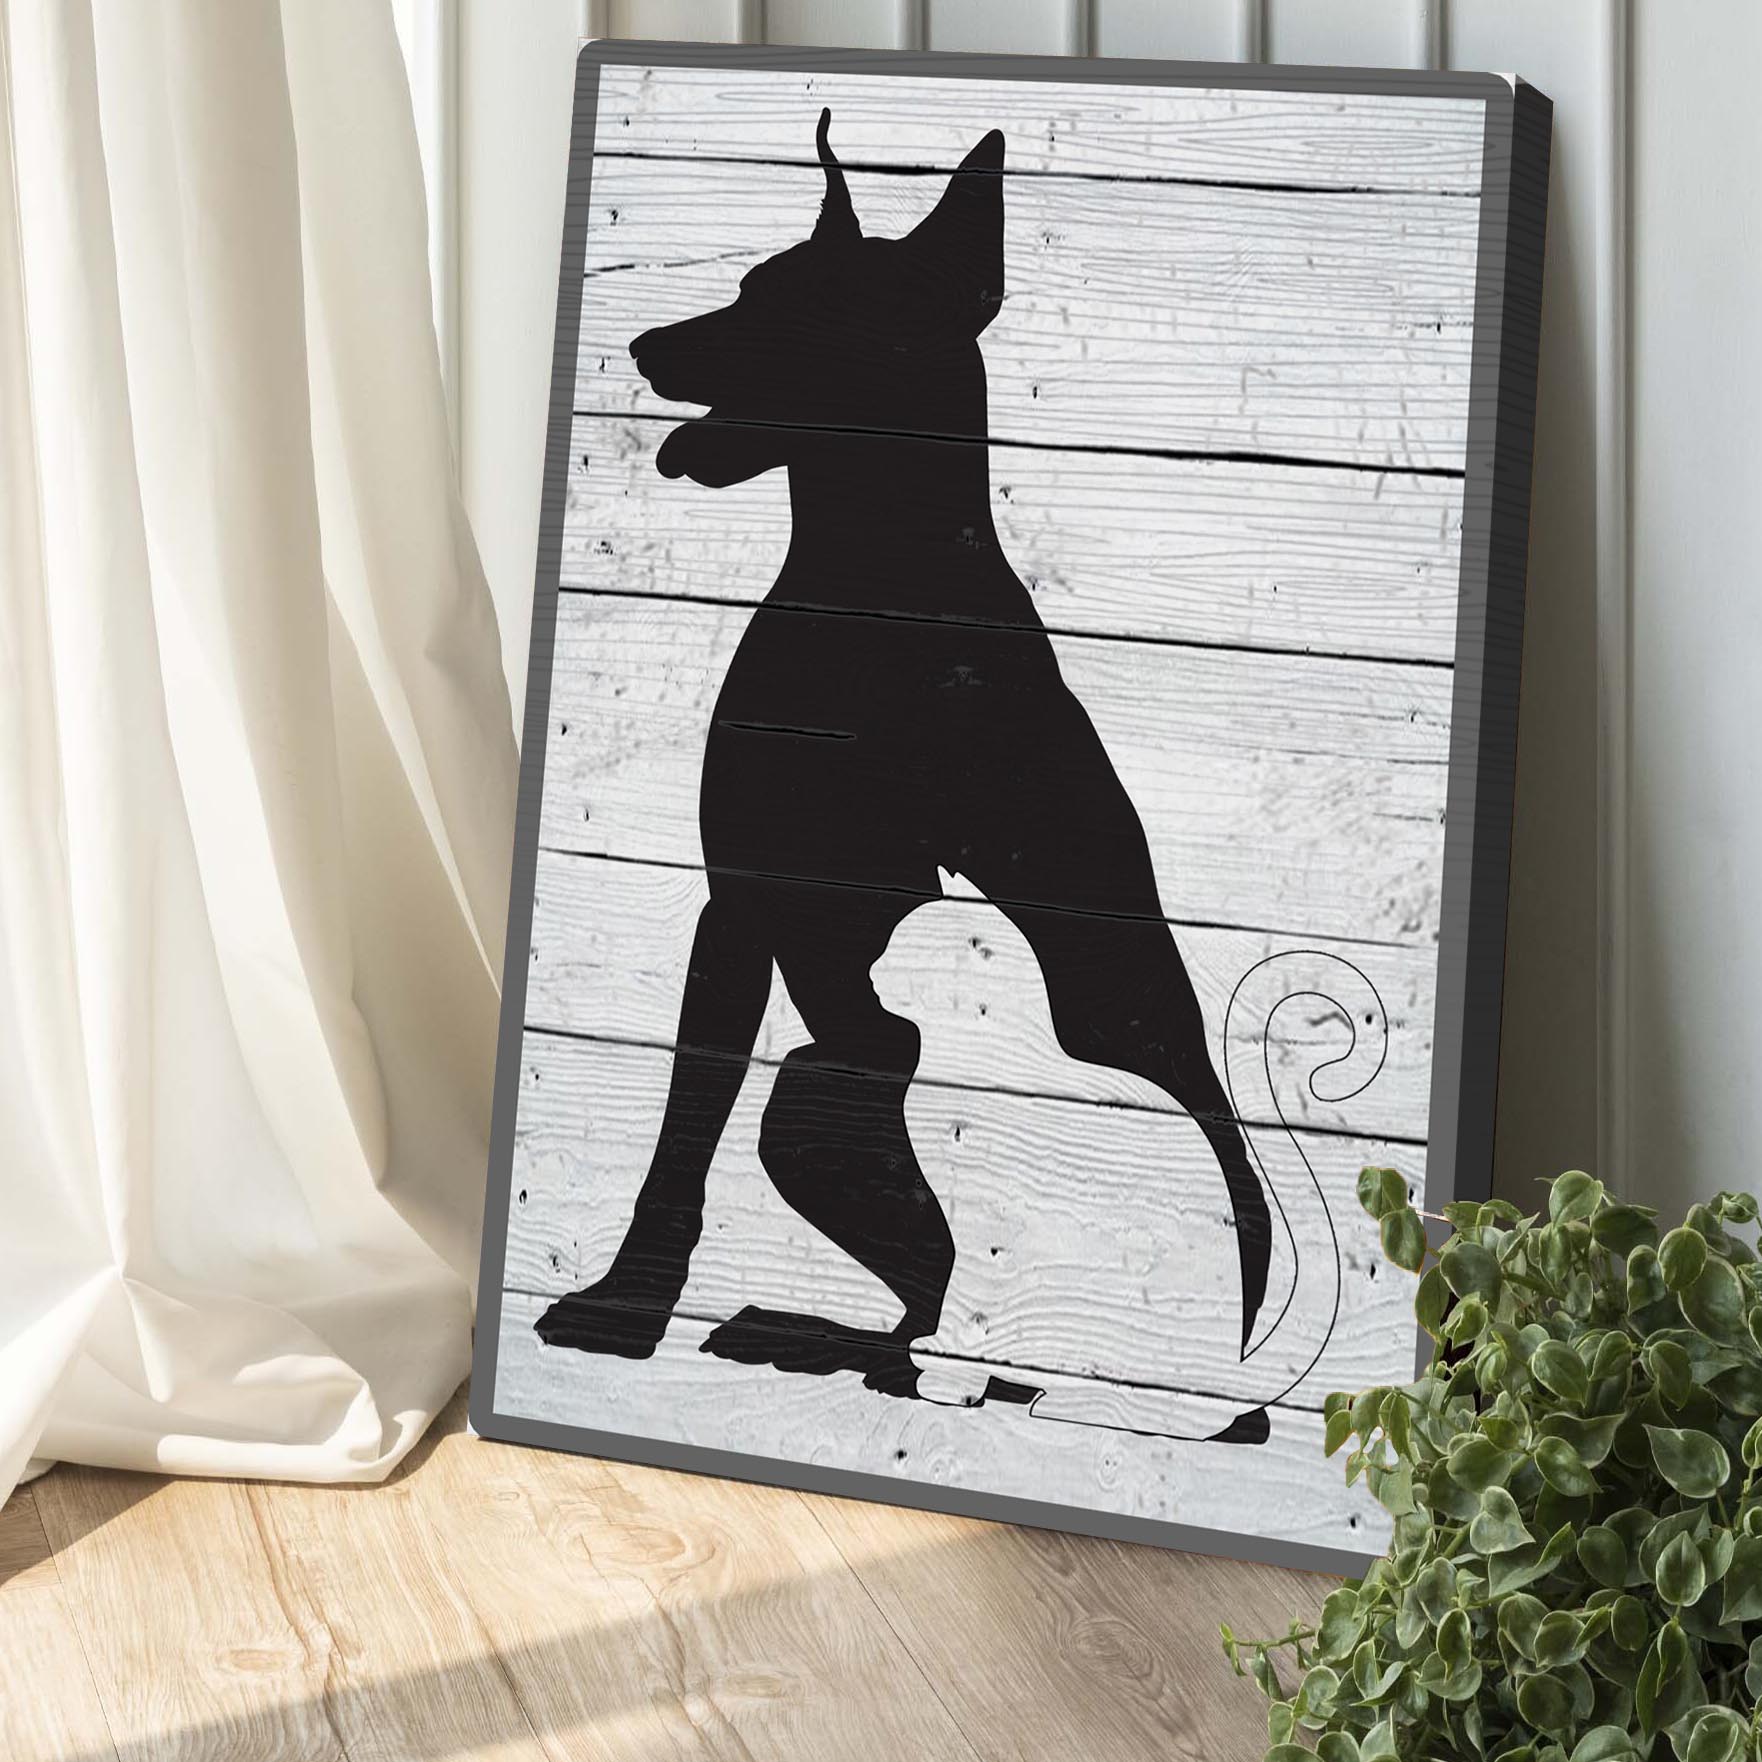 Paw-some Companions Cat and Dog Pet Canvas Wall Art